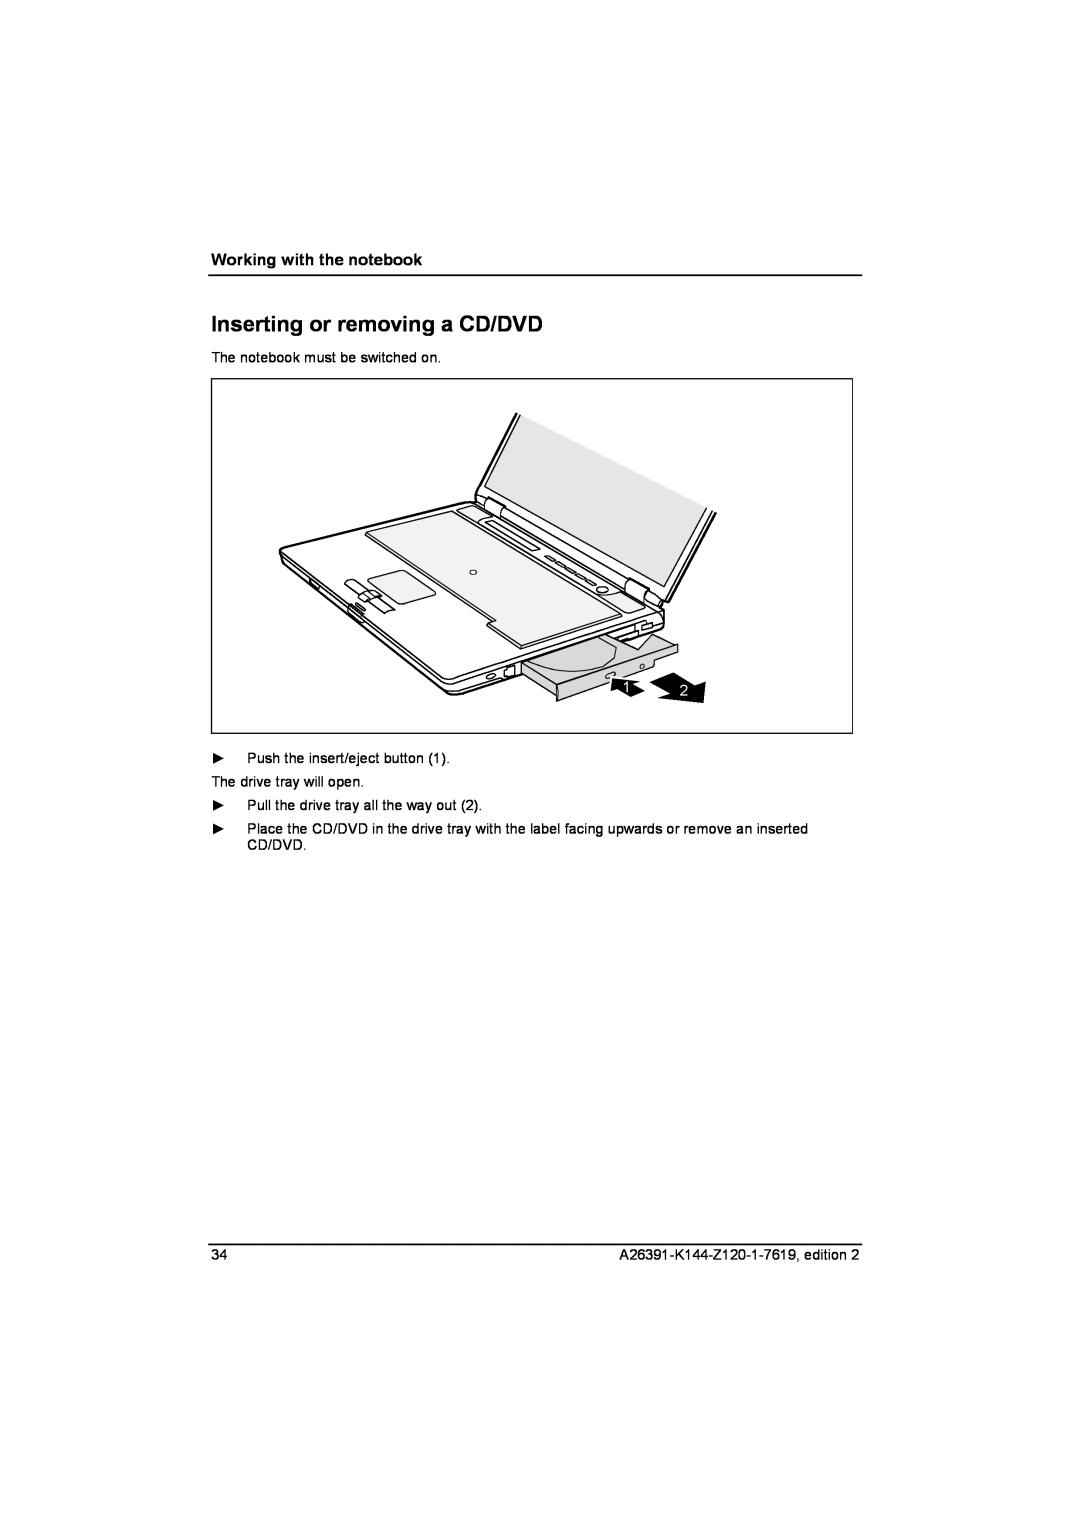 Fujitsu S SERIES manual Inserting or removing a CD/DVD, Working with the notebook, The notebook must be switched on 